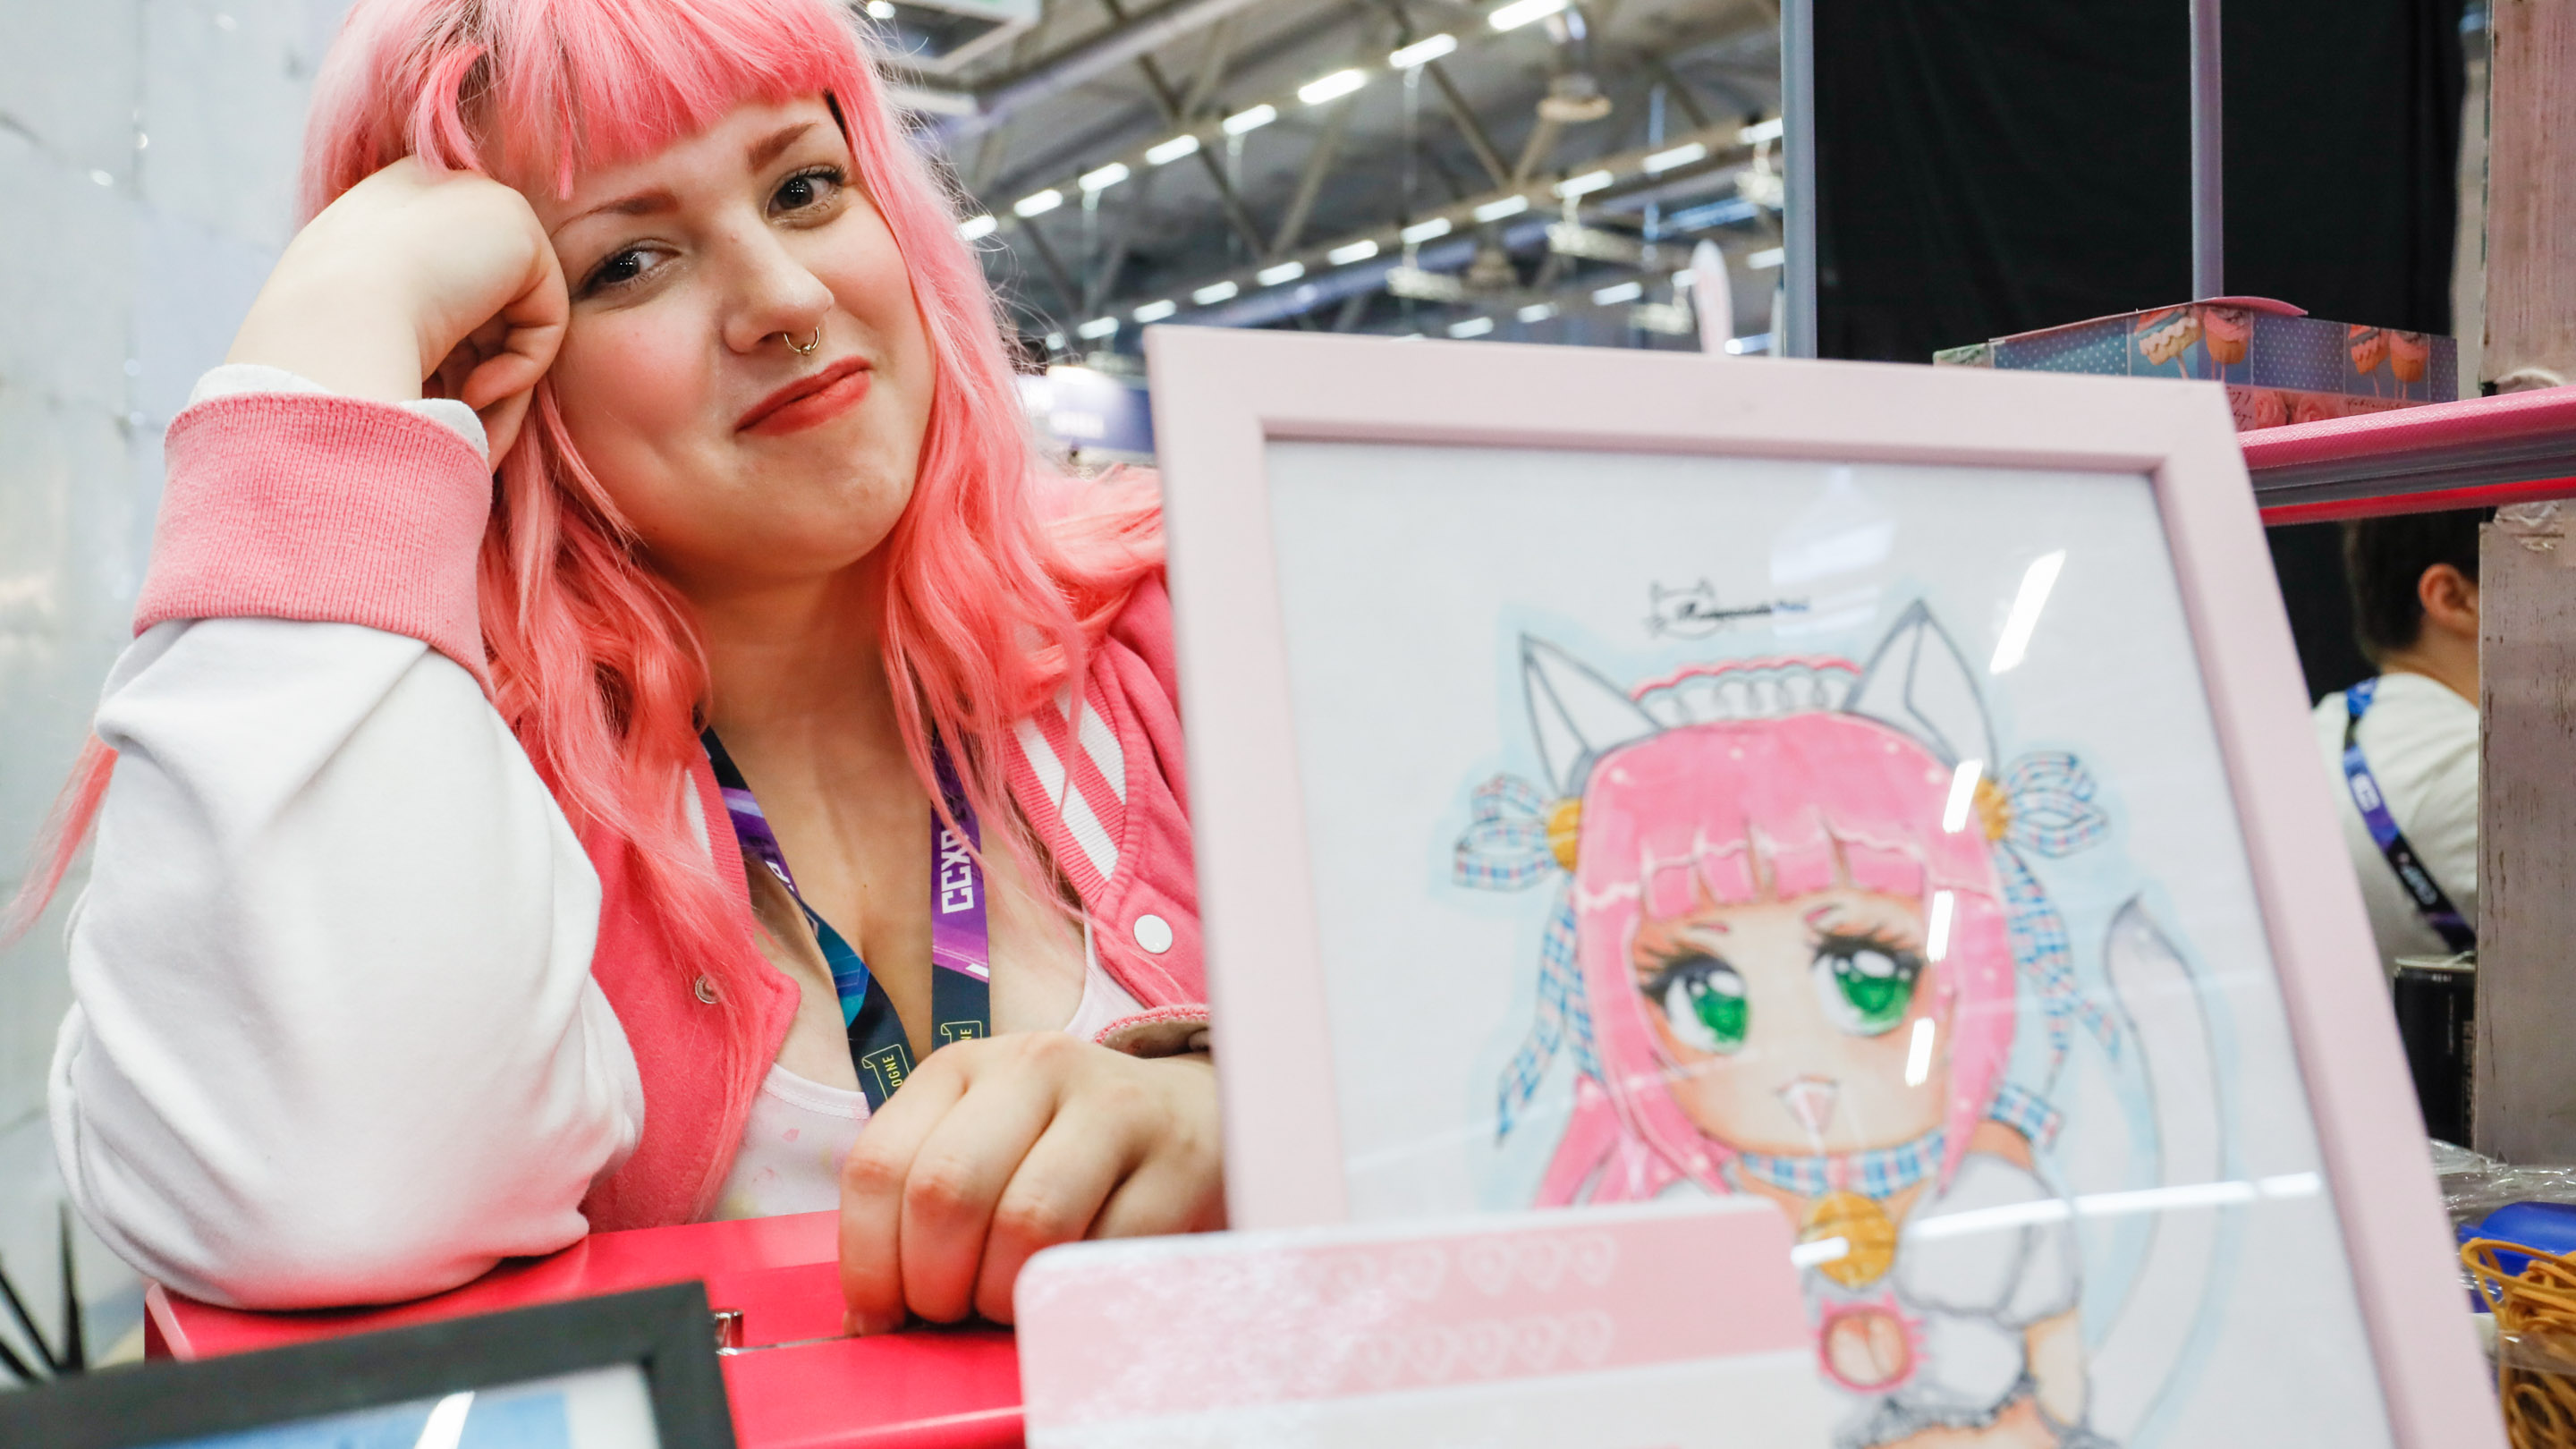 Cosplayer, Halle 7, Comic Con Experience 2019